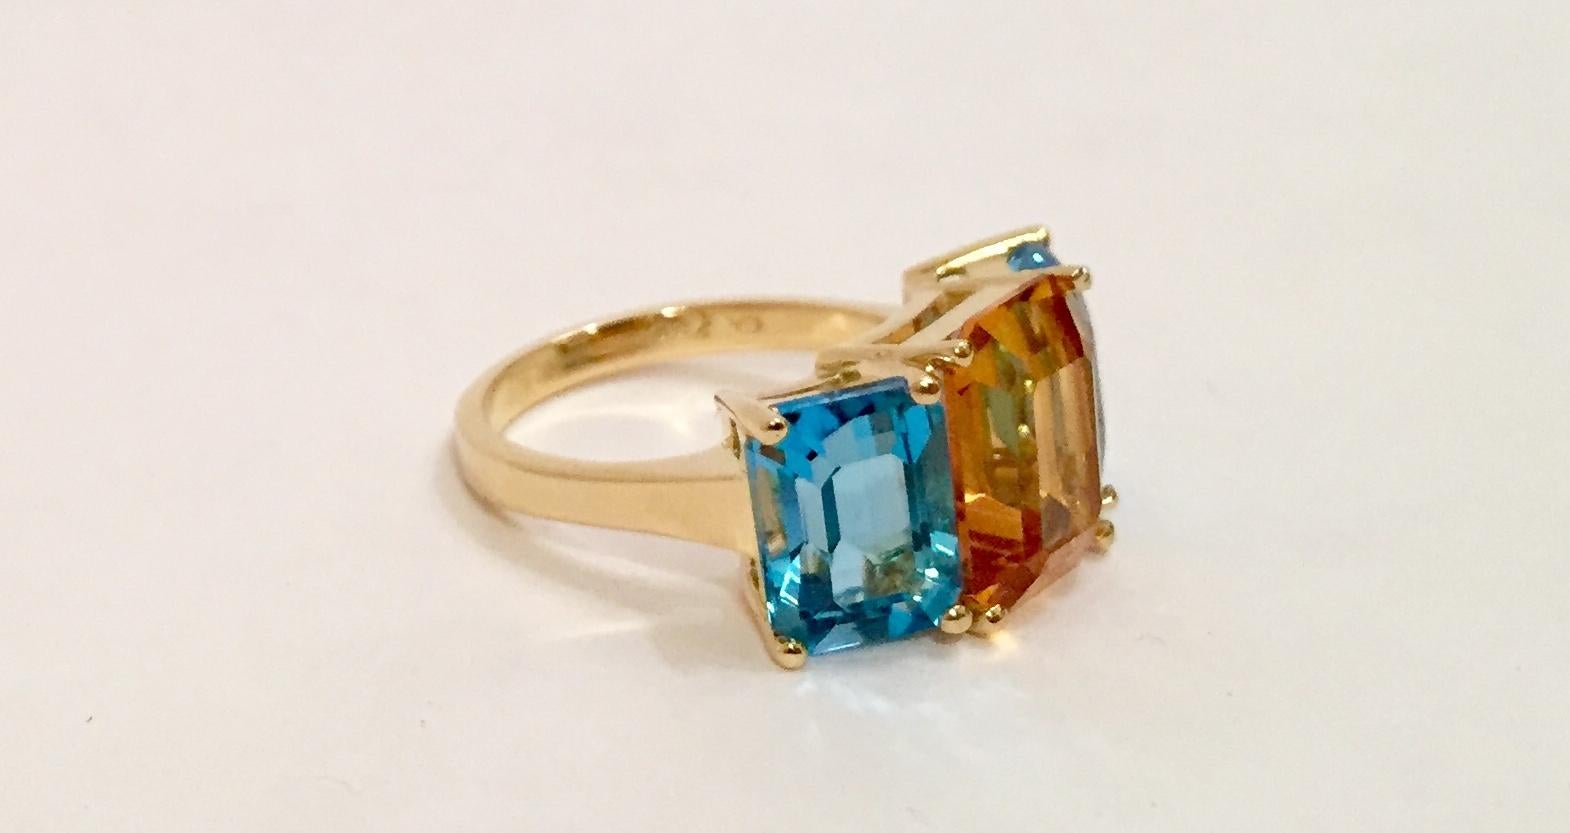 18 Karat Yellow Gold Mini Emerald Cut Ring with Orange Citrine and Blue Topaz.

This mini emerald cut ring can be made in any ring size and with any colored semi precious stone combination.  The Ring is sized for each client.

The ring Measures